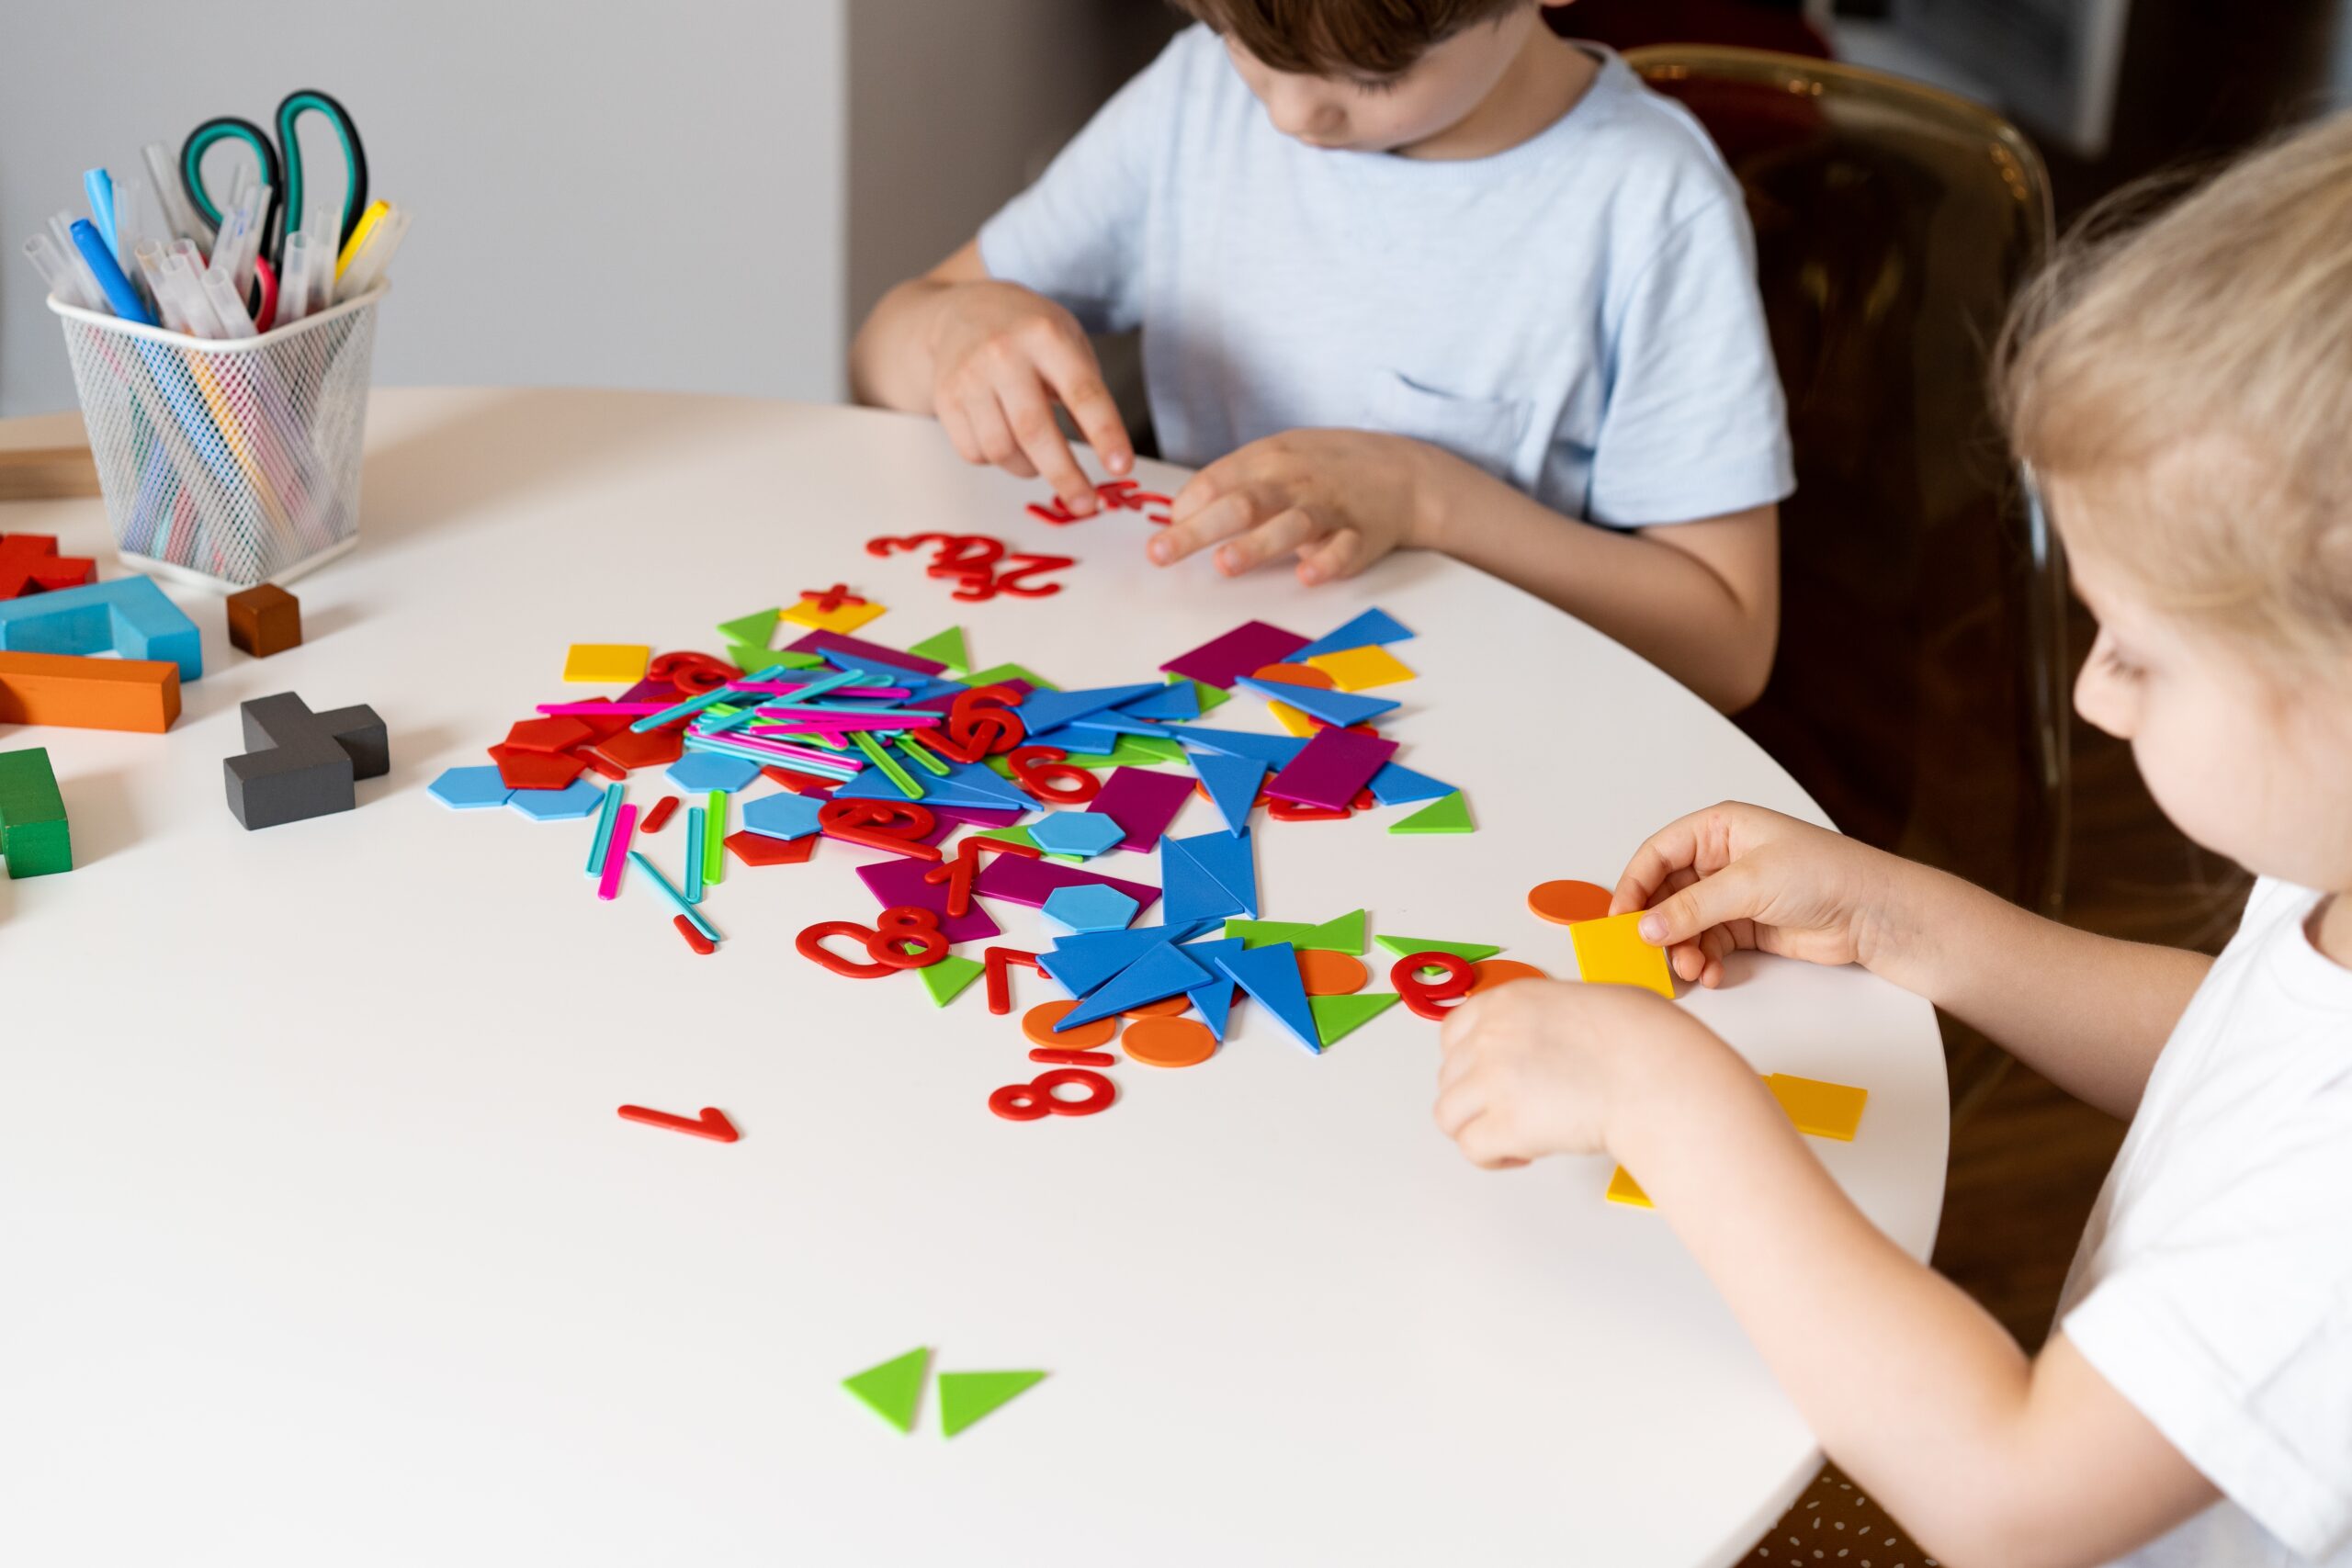 children playing with letter and shapes at a table in daycare